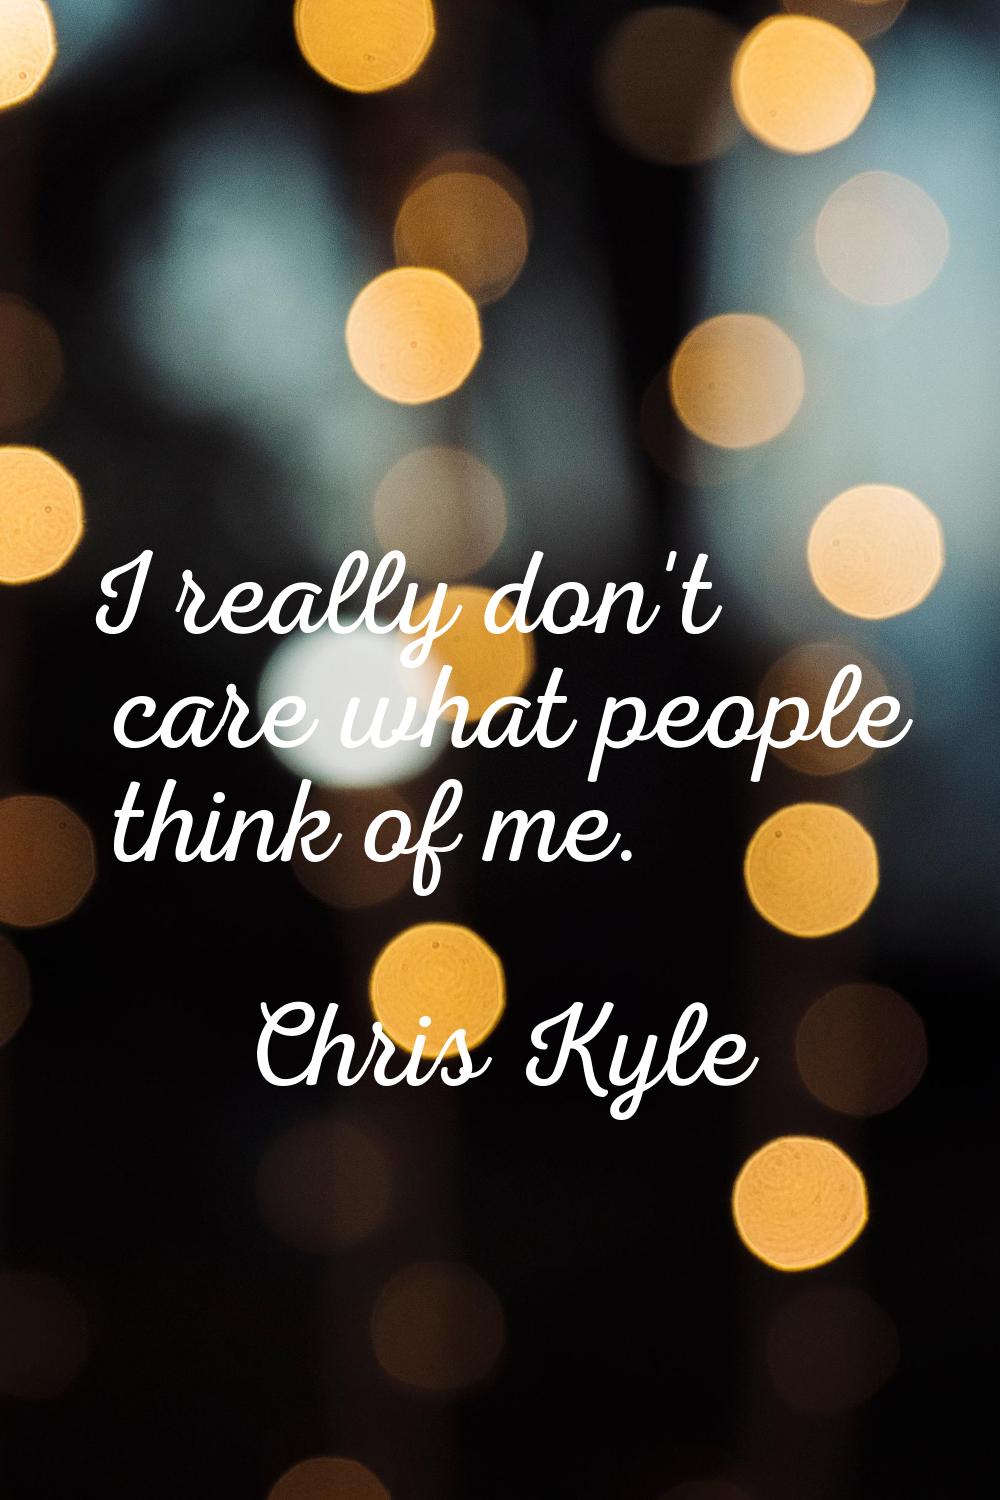 I really don't care what people think of me.